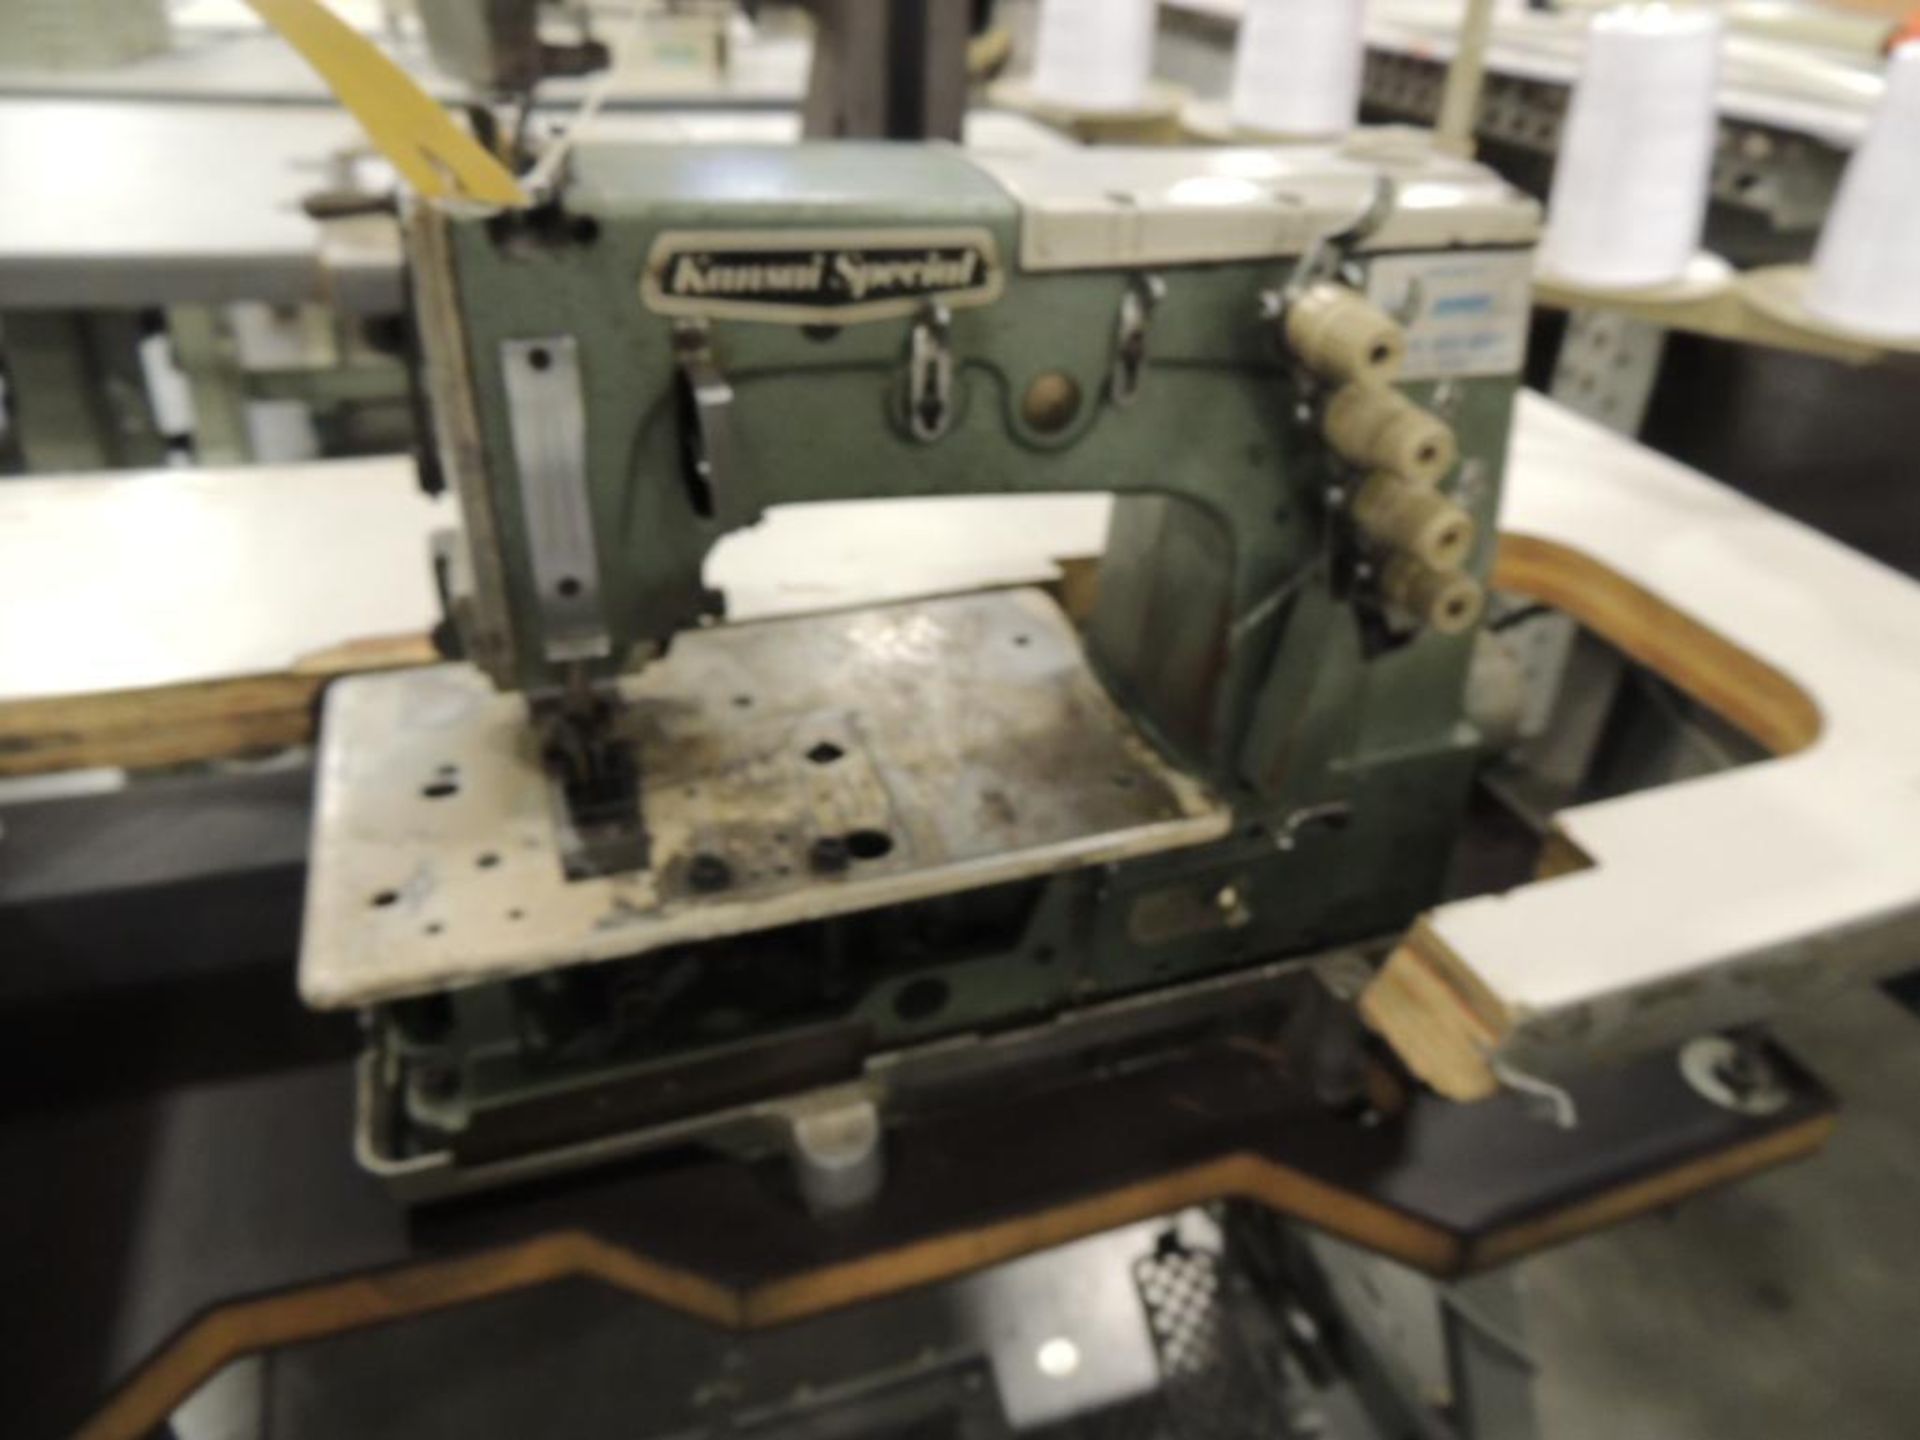 Kansai Special DLR-1502 PHD 2-Needle, 5-Thread Sewing Machine, on Table